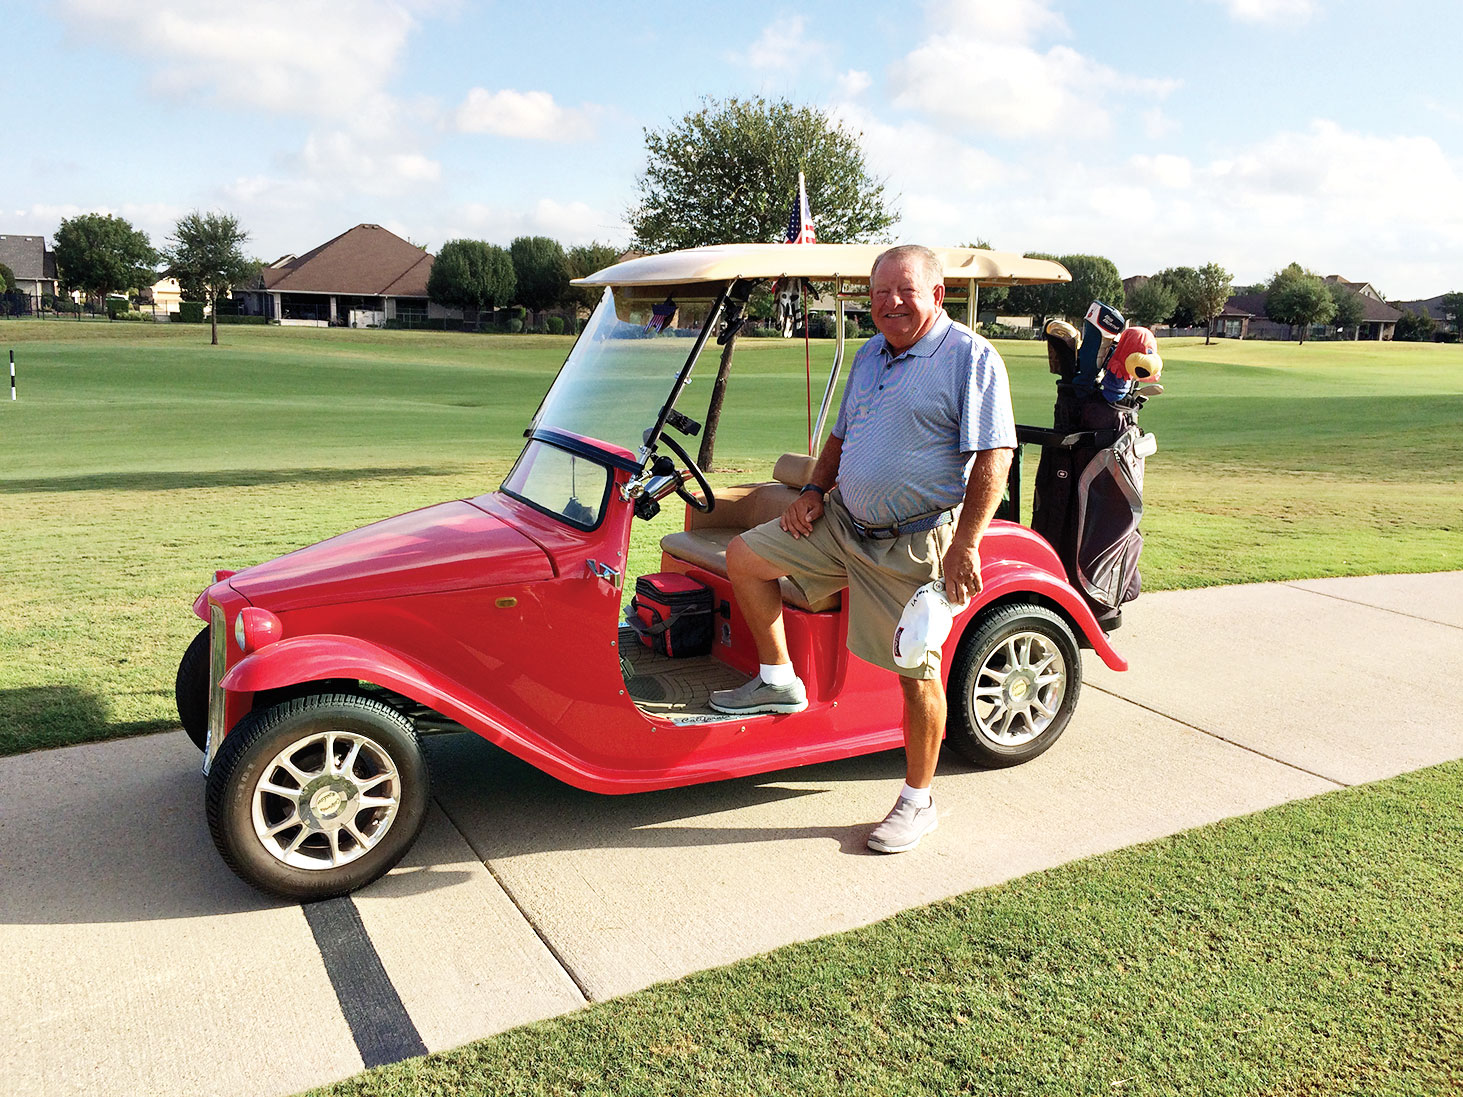 Denny with his California Classic ’32 Ford Roadster golf cart